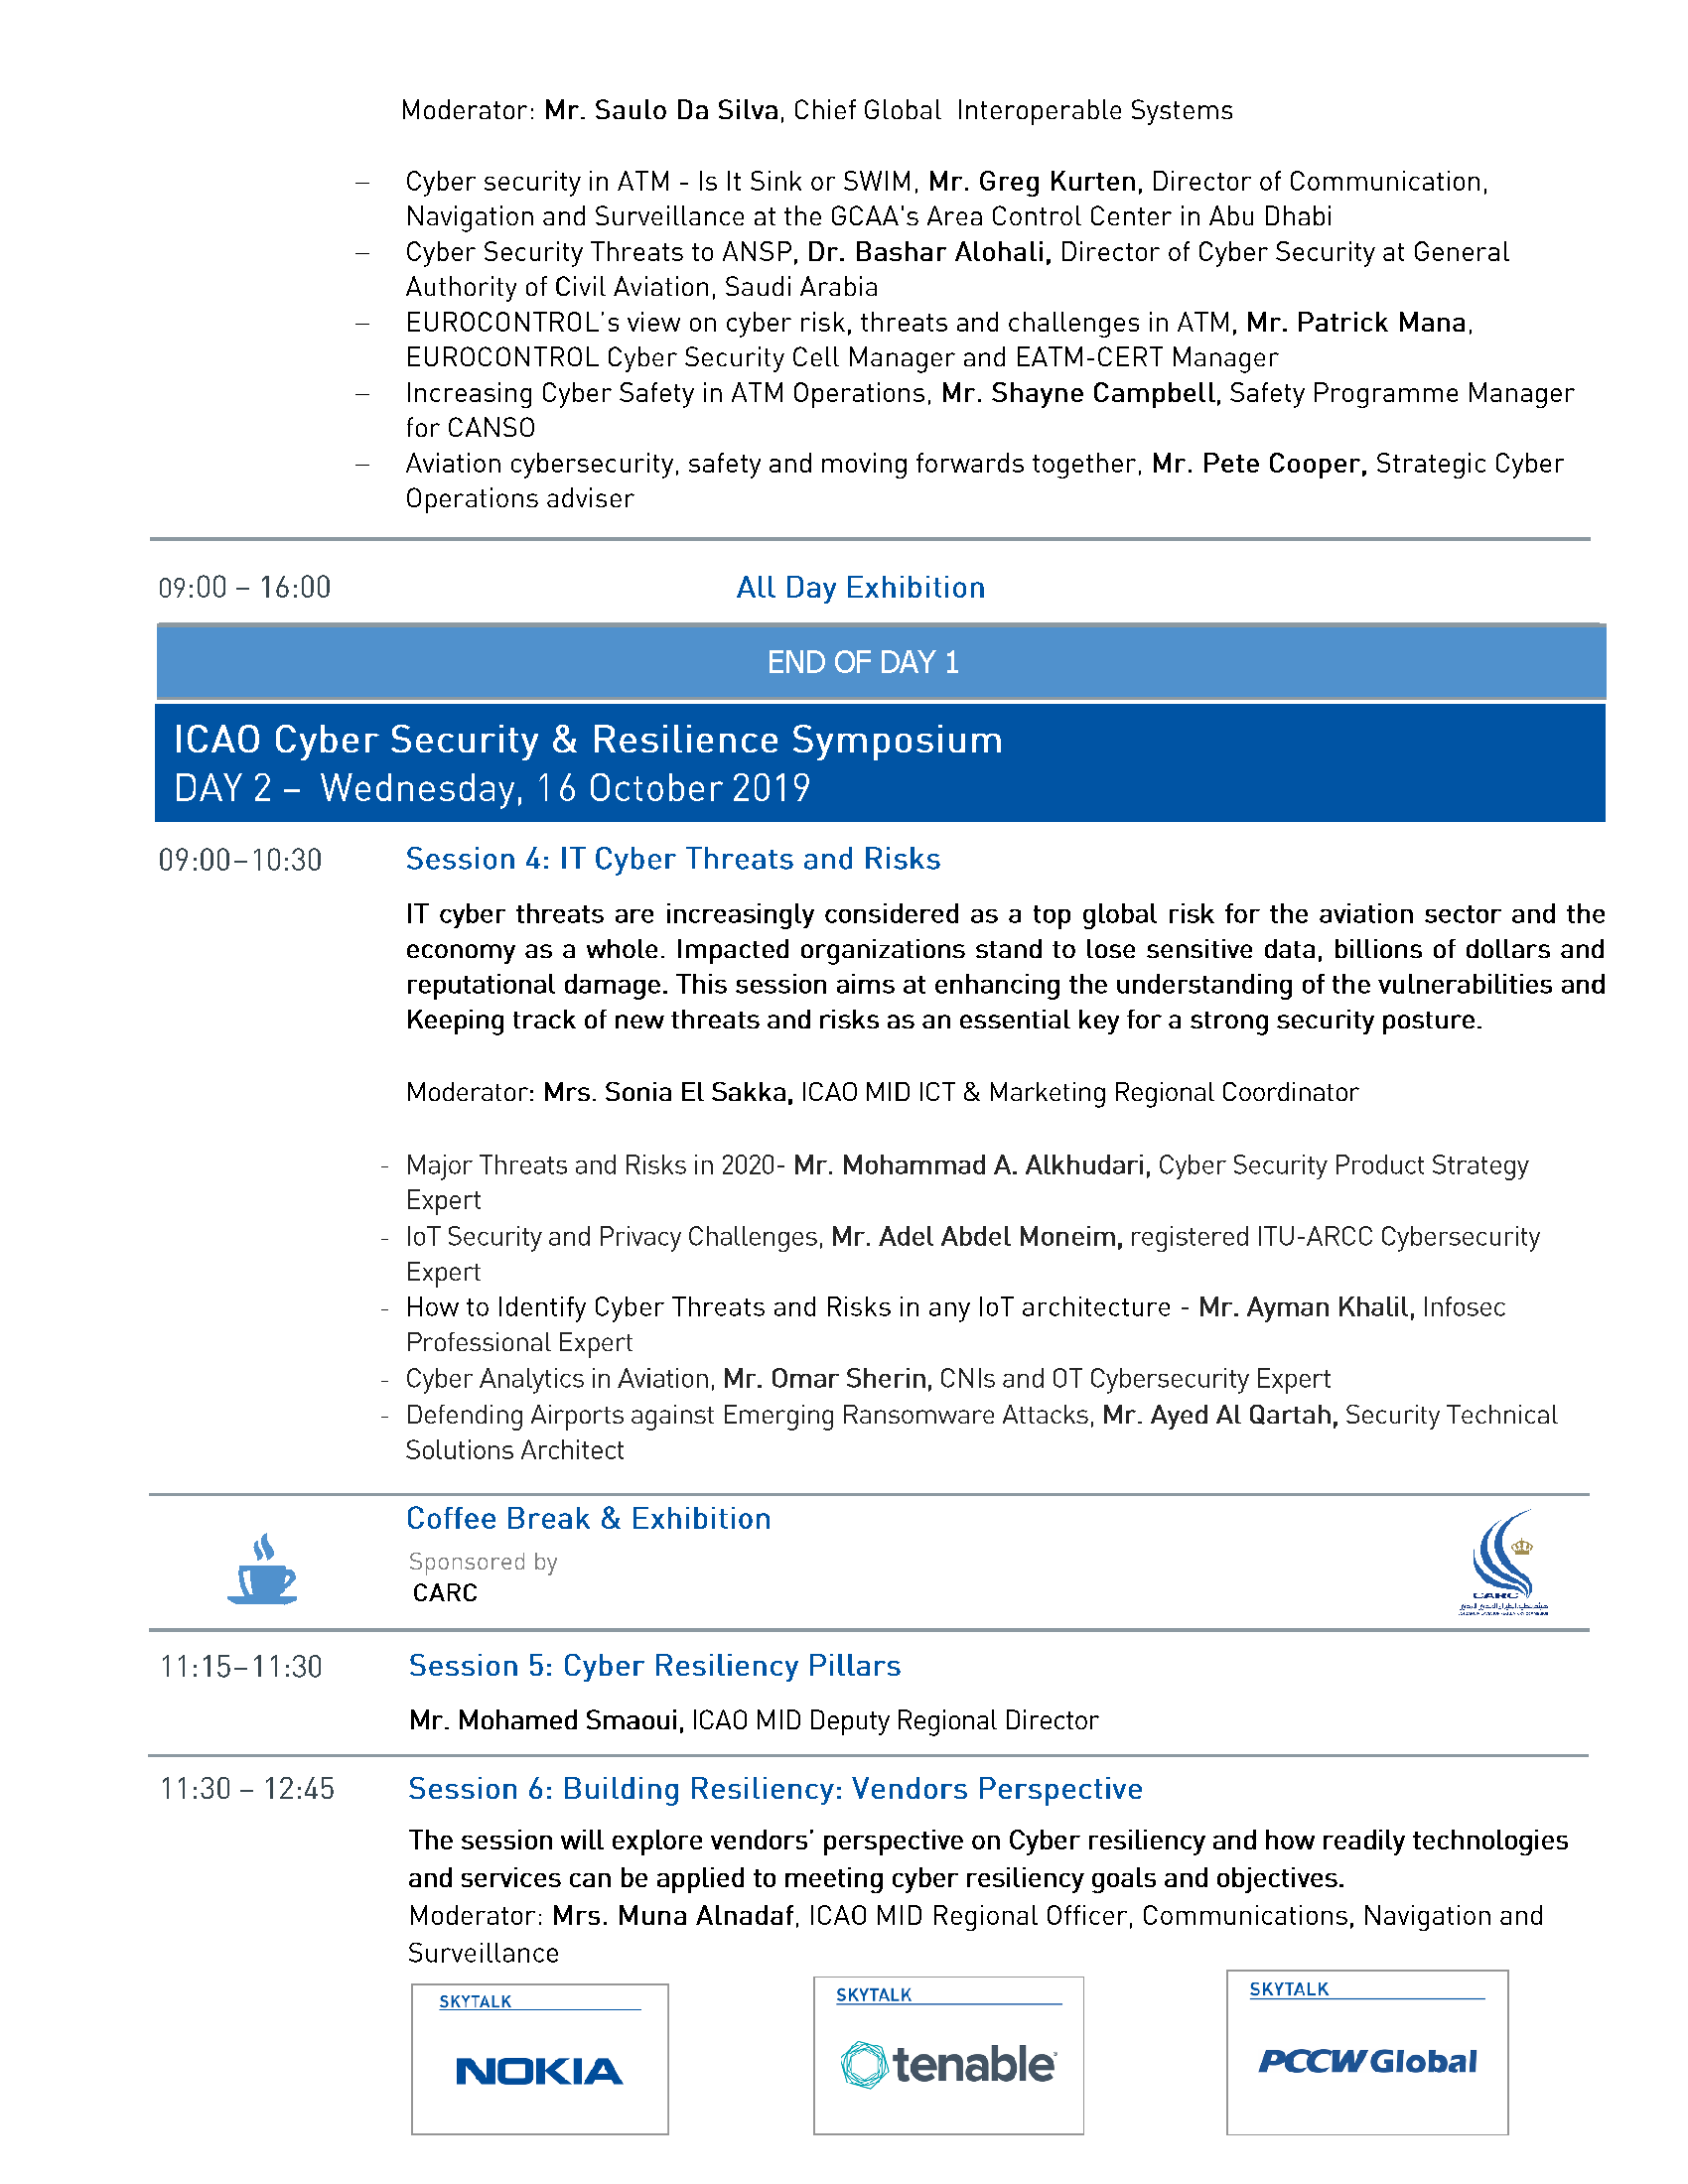 ICAO Cybersecurity and Resilience Symposium 12 Oct 2019_Page_3.png